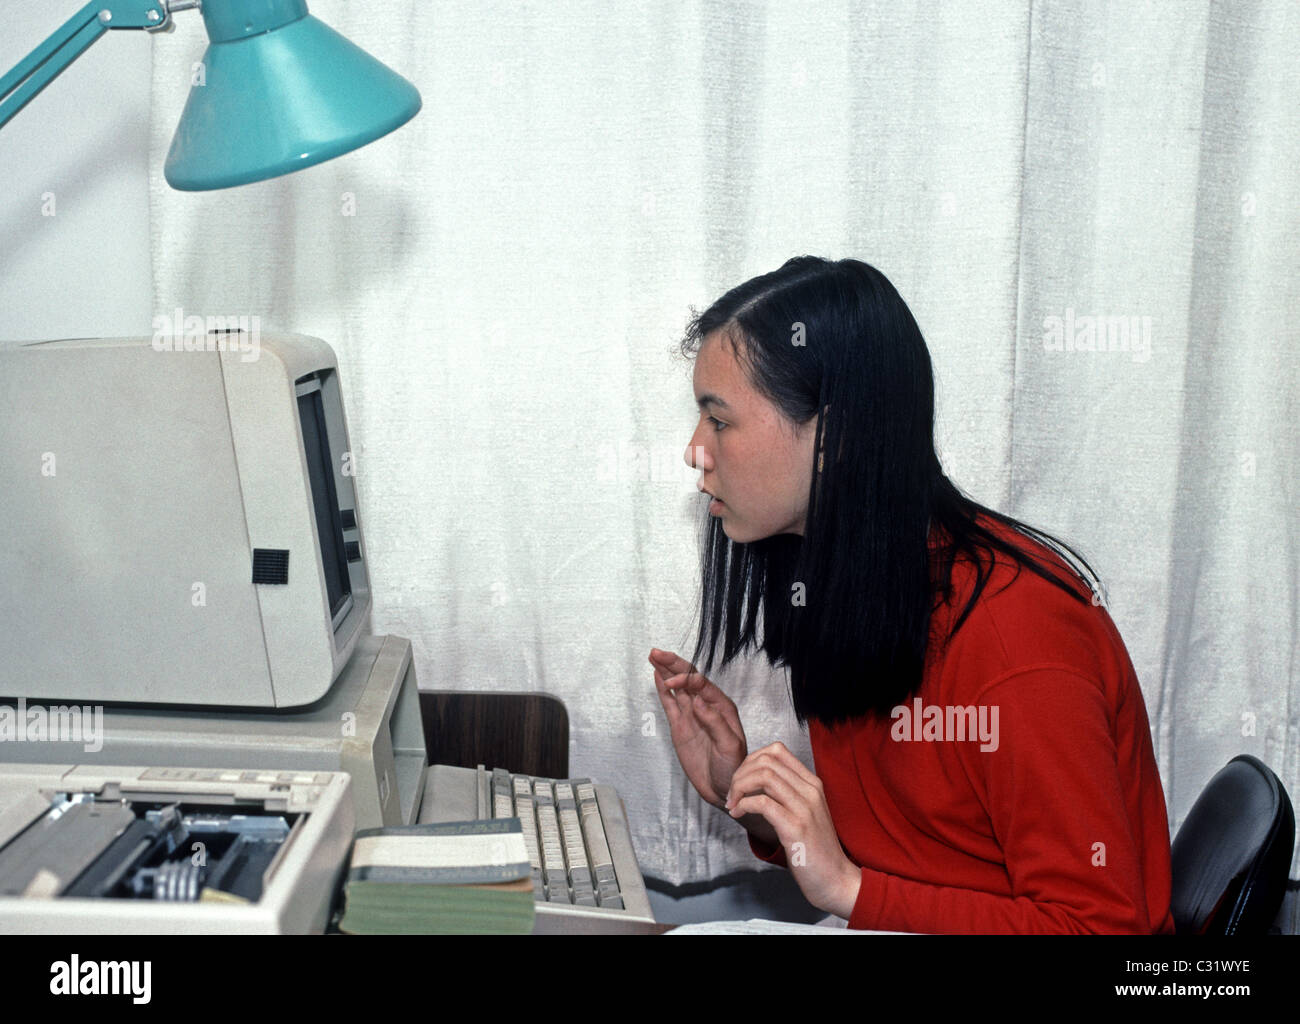 girl using a PC home computer Stock Photo